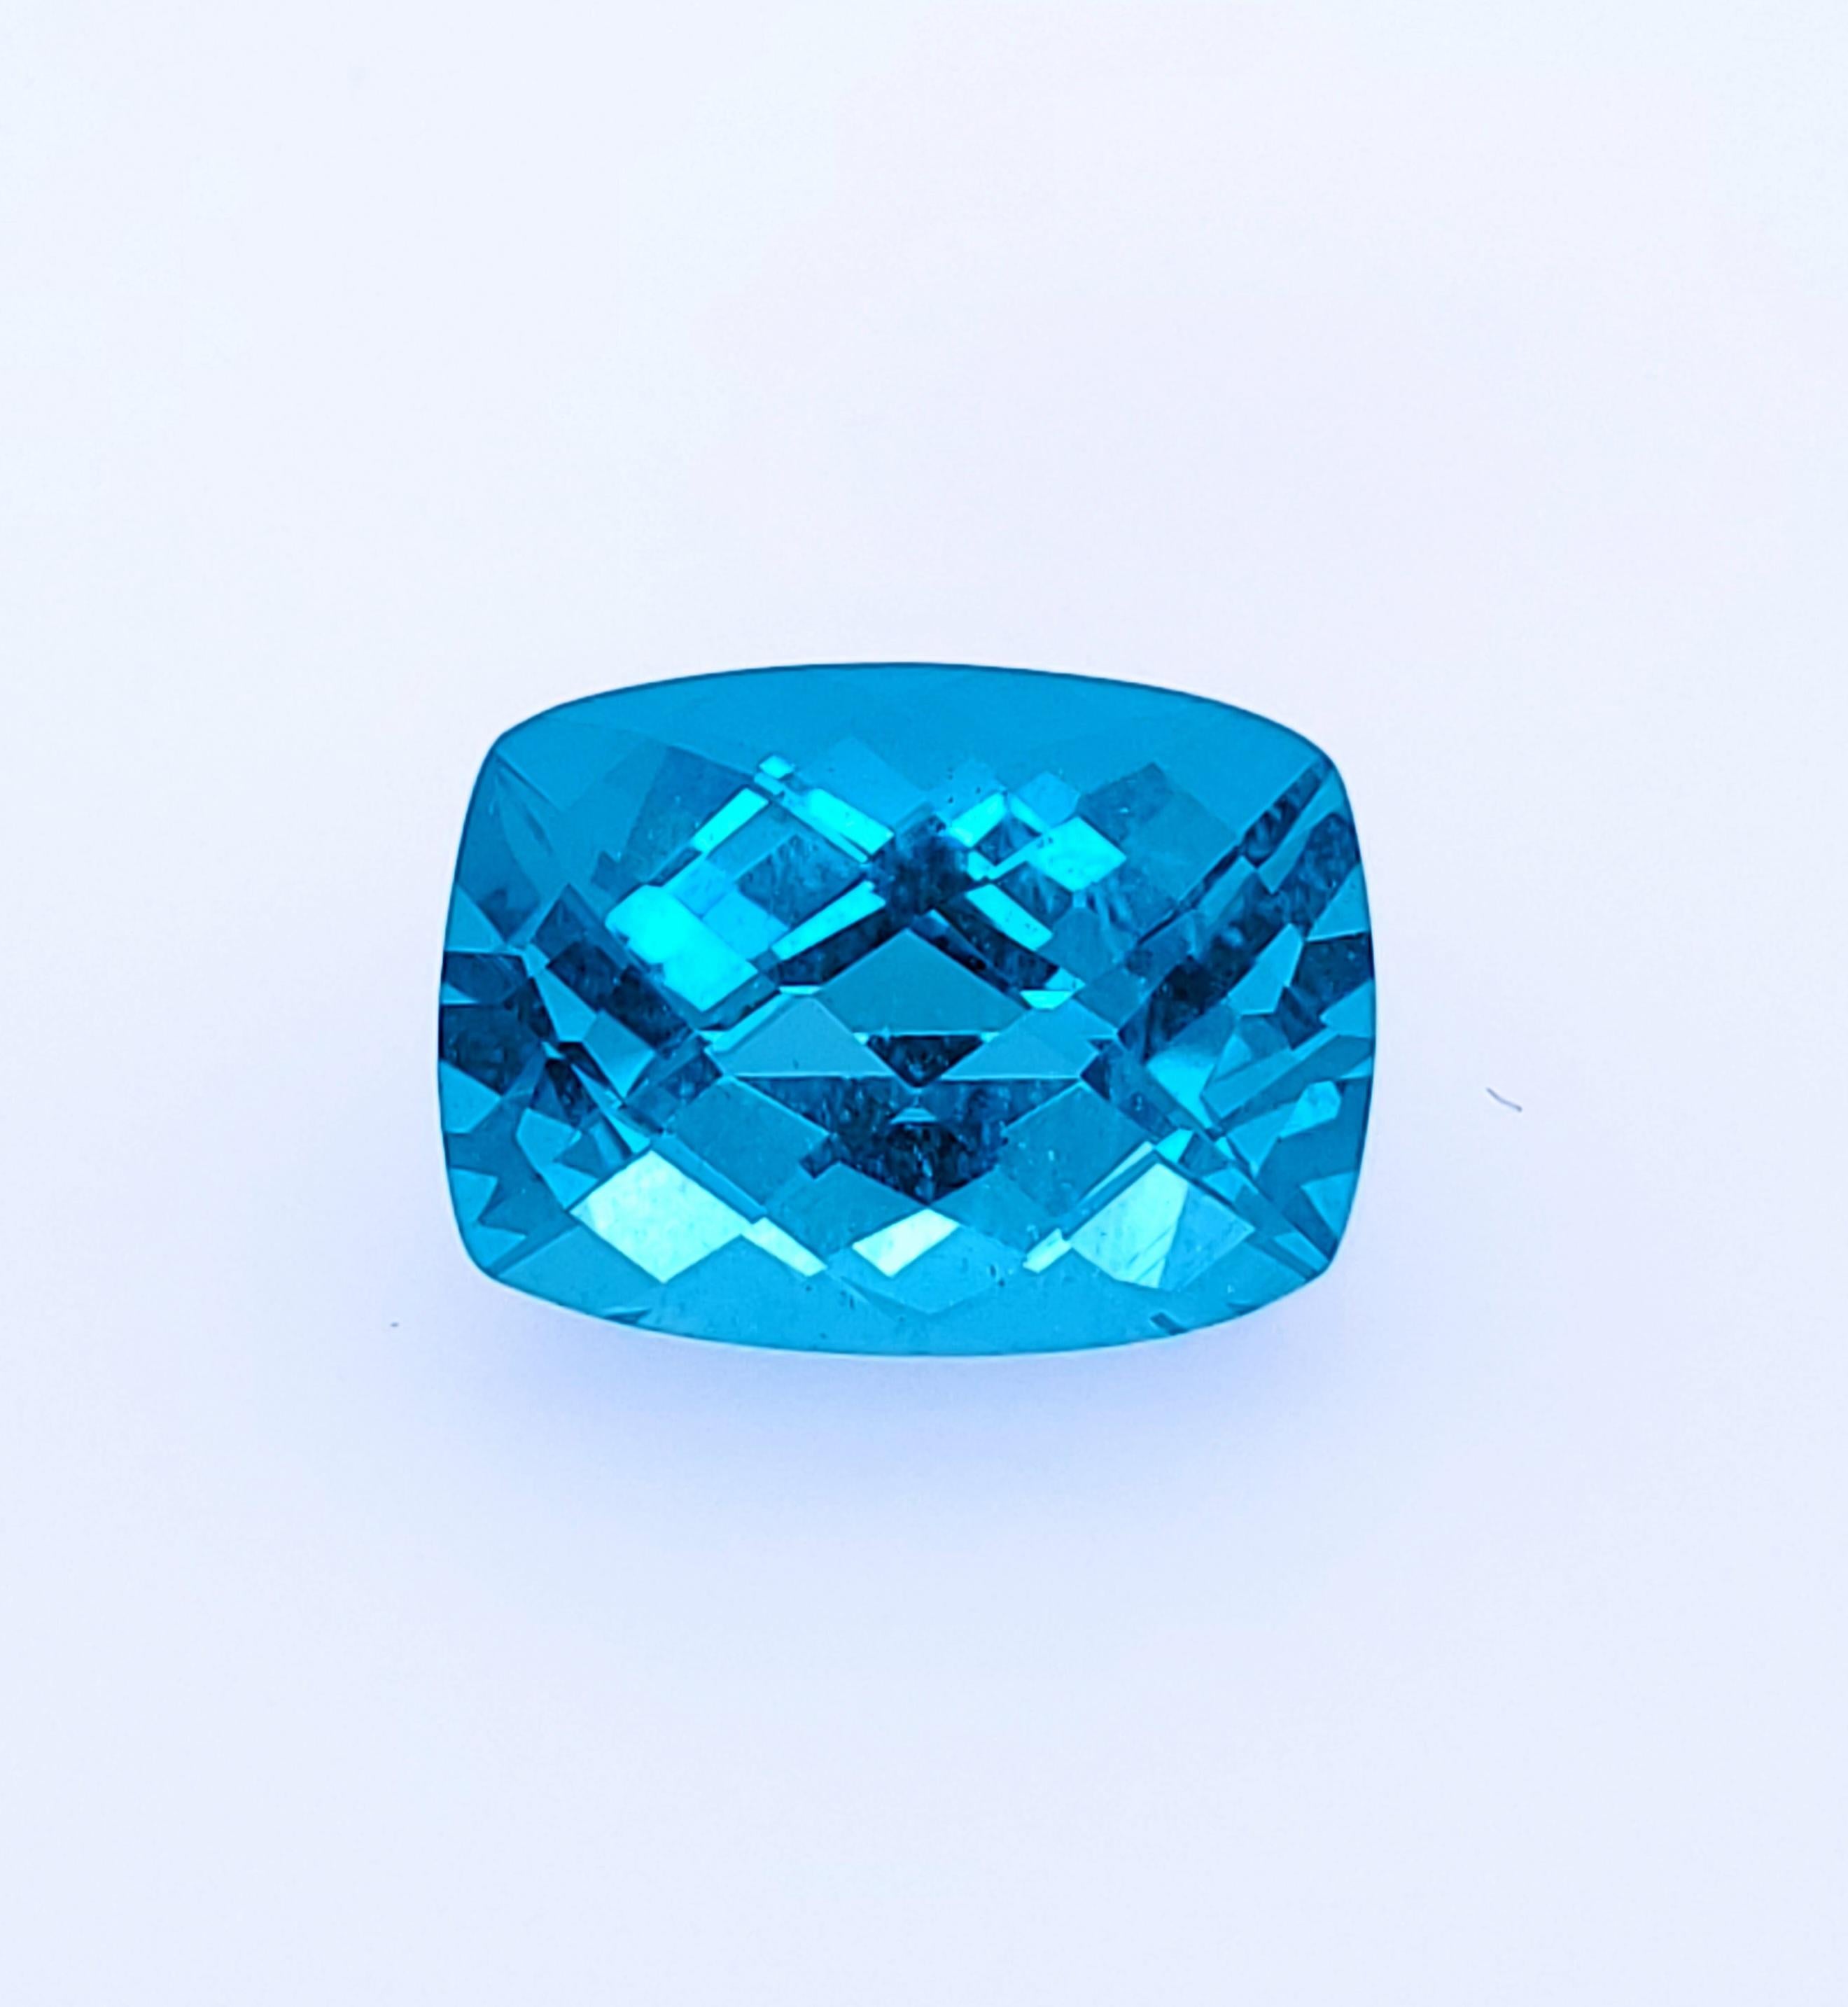 Very Large 10.72ct Cushion Cut Neon Paraiba Blue Apatite. It truly has that Paraiba Blue color, and can be seen from 30 feet away with no problem! An incredible piece and the body color  - Think of a bright neon Caribbean Ocean if you are unfamiliar